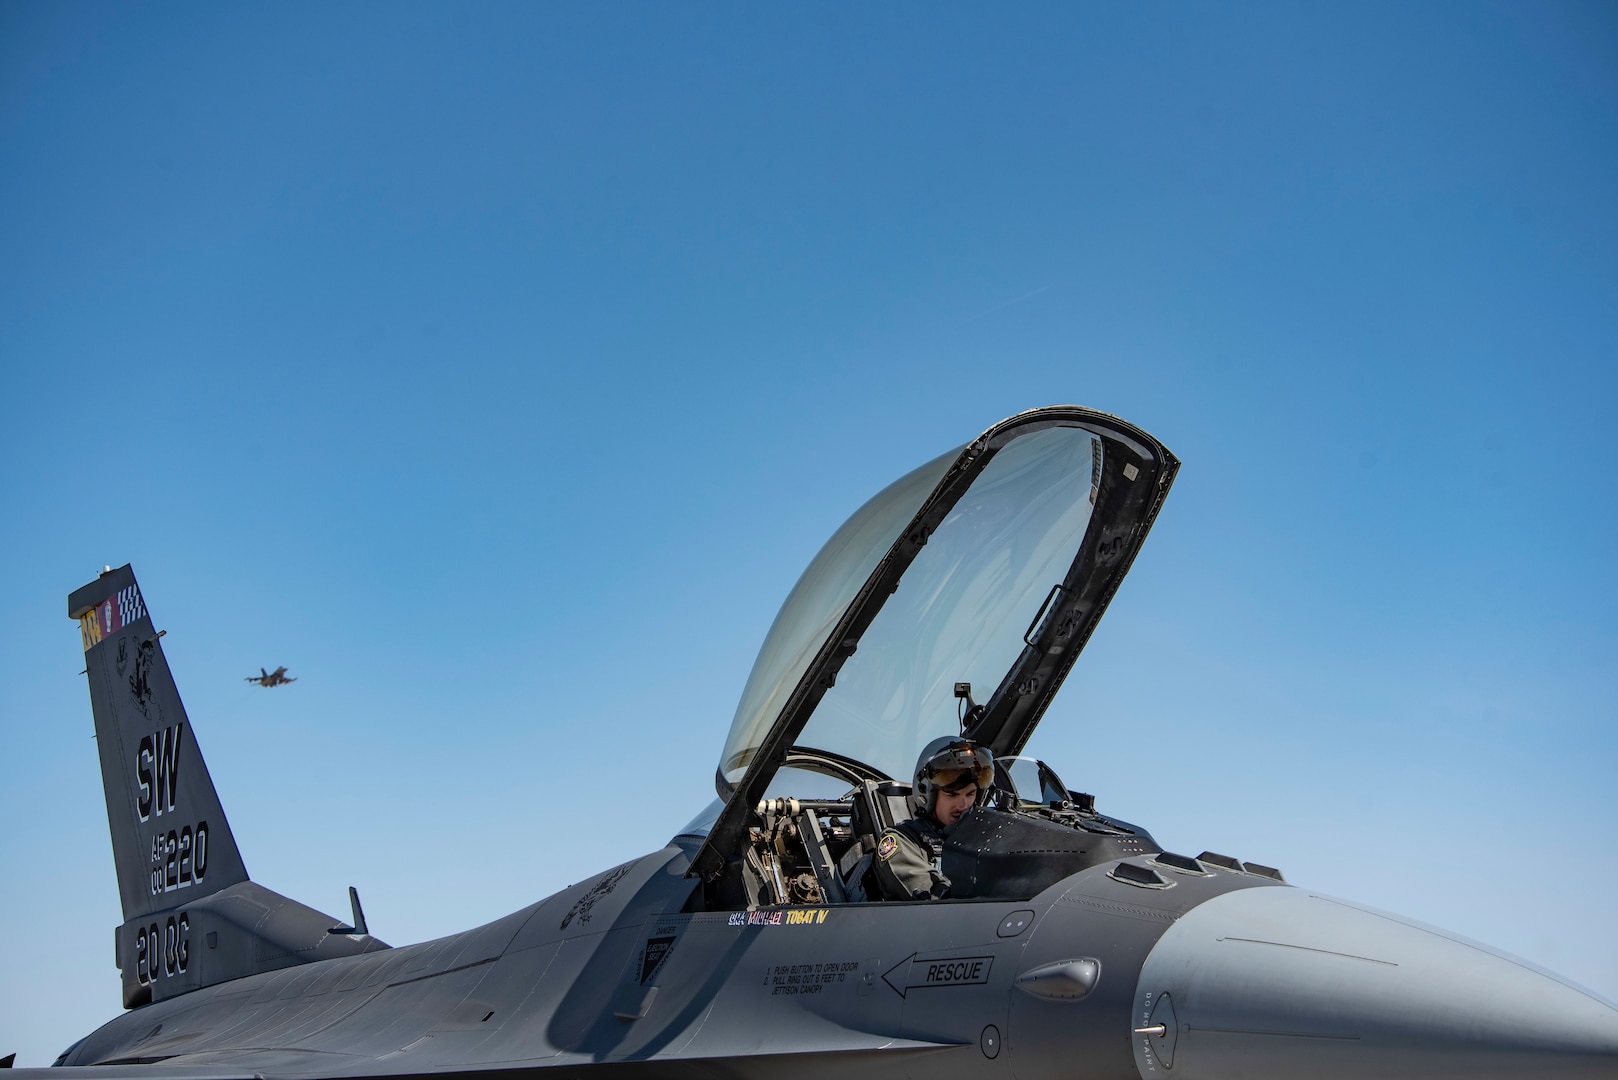 A 20th Fighter Wing pilot prepares for a mission during Red Flag 21-2 at Nellis Air Force Base, Nevada, March 8, 2021. The 20th FW brought over 500 individuals from Shaw AFB, South Carolina, including two fighter squadrons to participate as the host unit. The two fighter squadrons, the 55th “Shooters” and 79th “Tigers,” are responsible for maintaining the safety of other units by escorting their aircraft in and out of the airspace as well as performing the units’ primary mission set: the suppression of enemy air defenses. (U.S. Air Force photo by Staff Sgt. Destinee Sweeney)